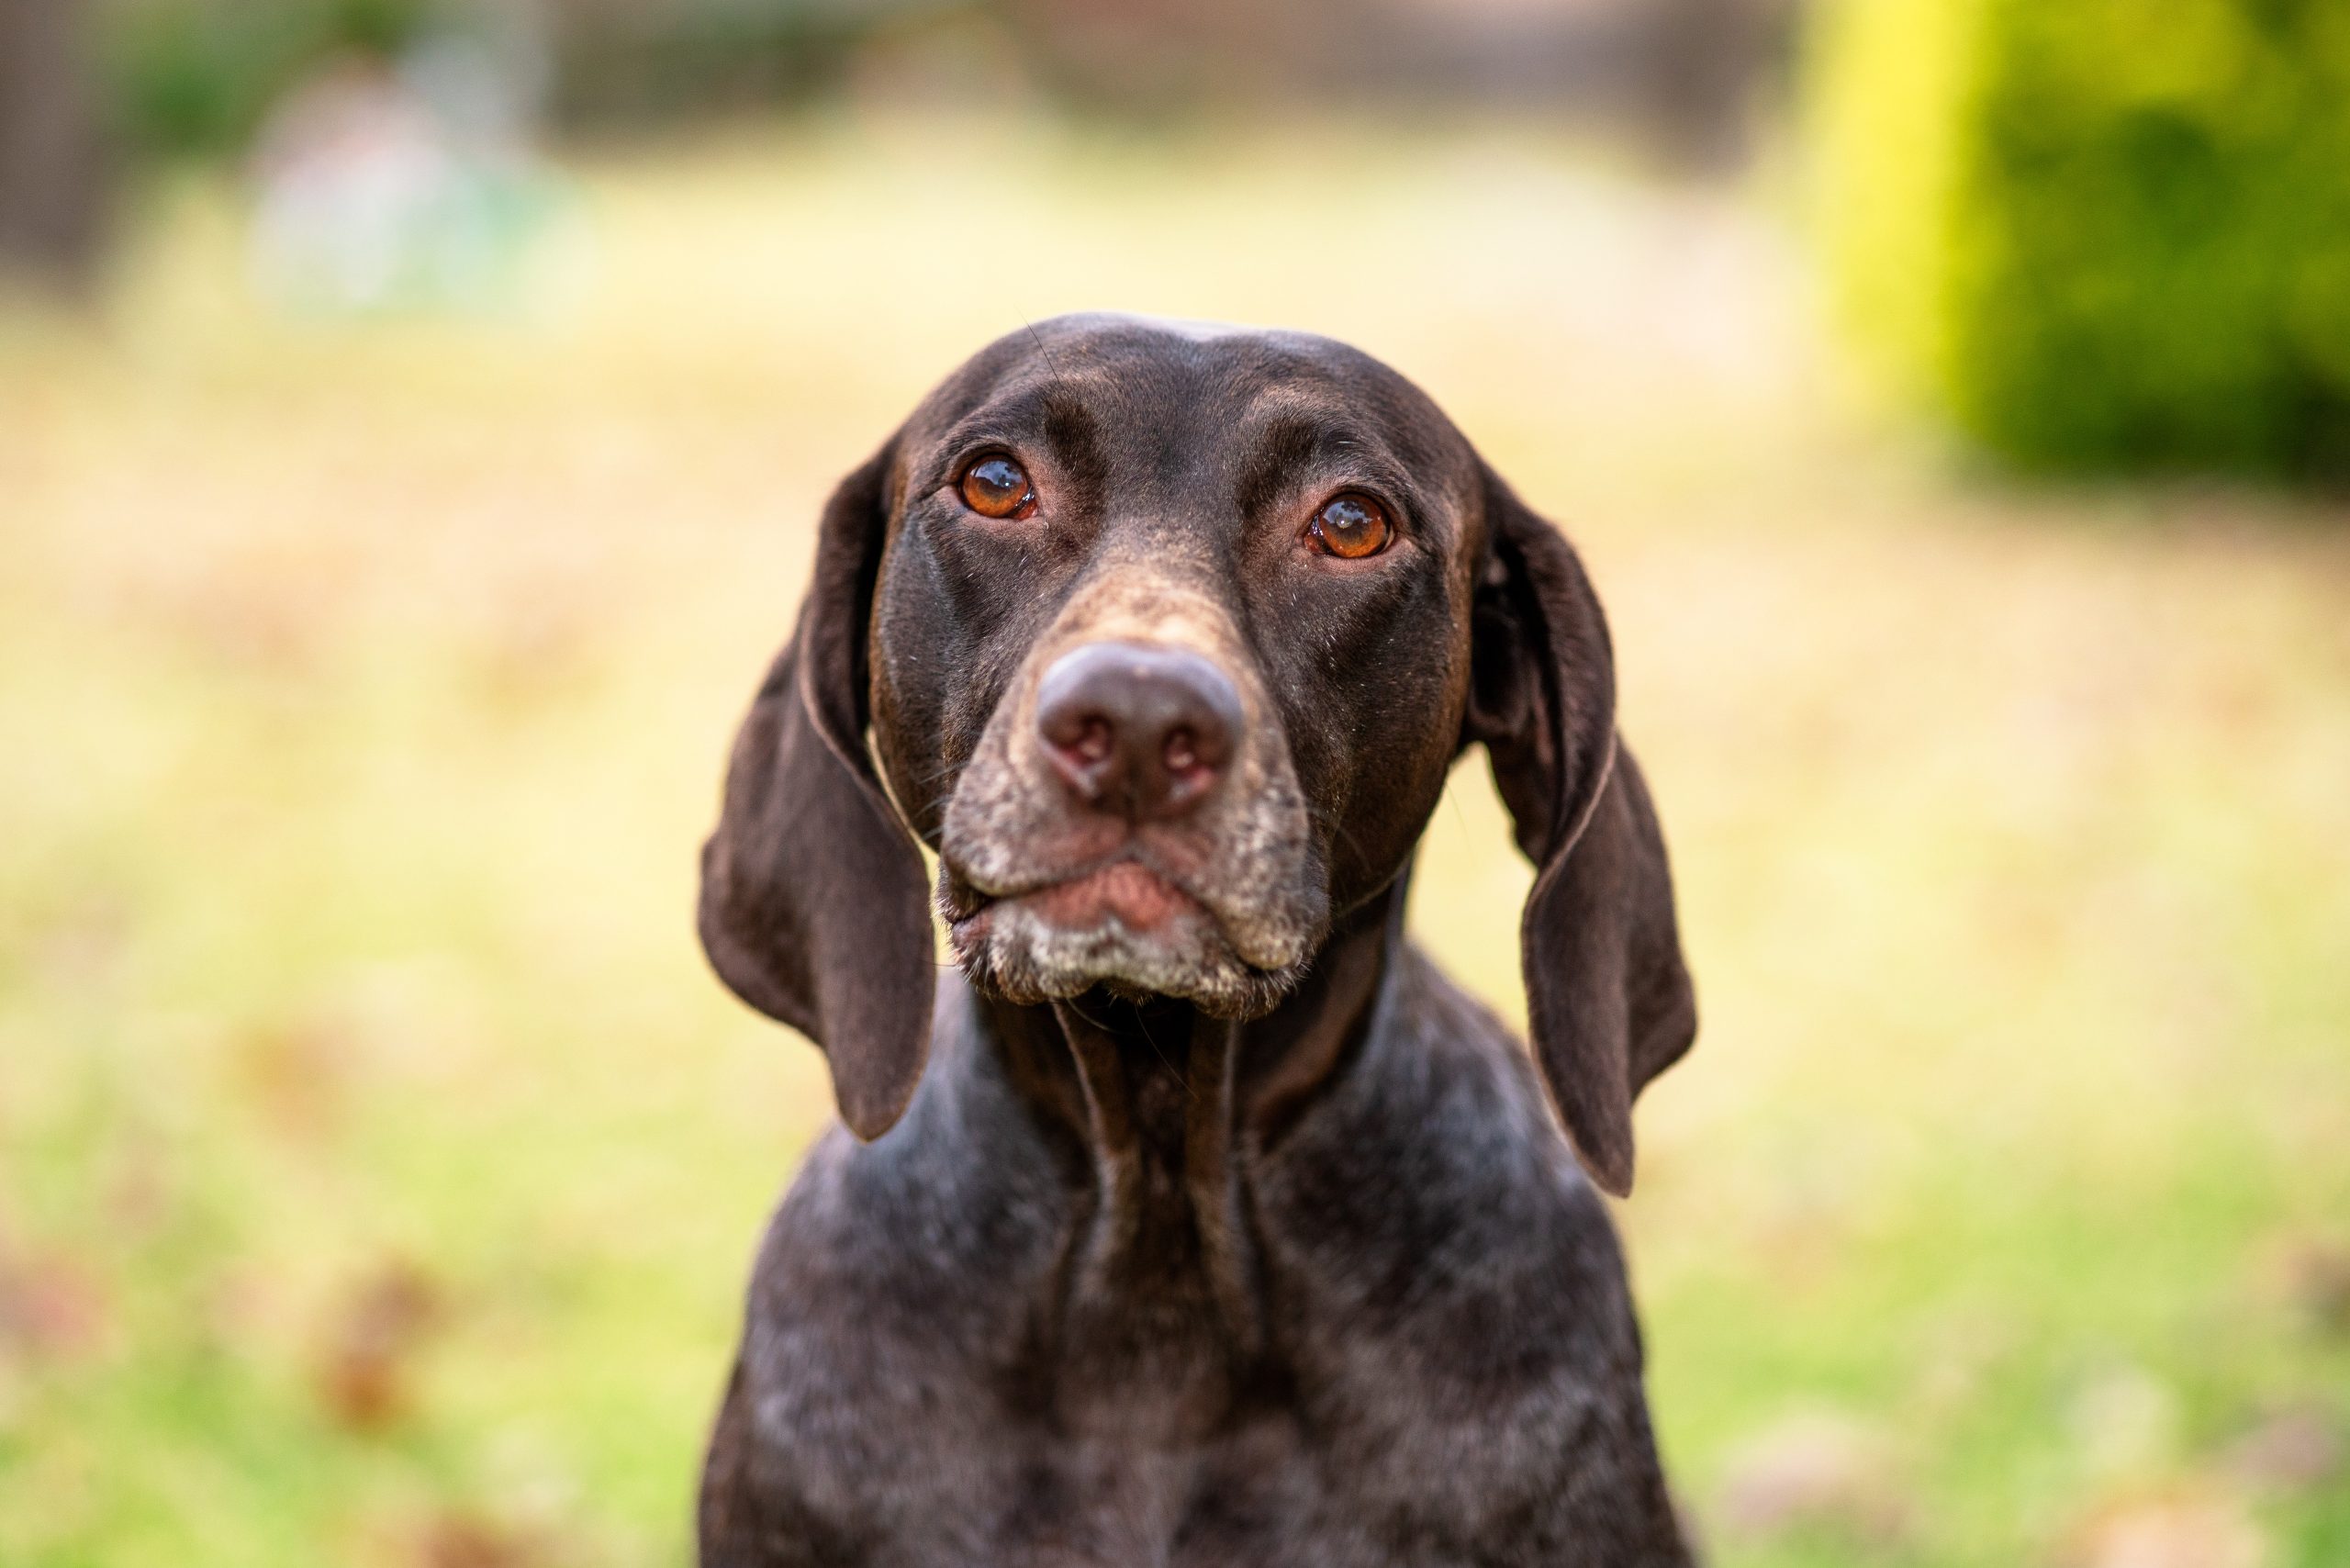 Dog Diarrhea: When is It Serious and How Do I Stop It? - East Hill ...